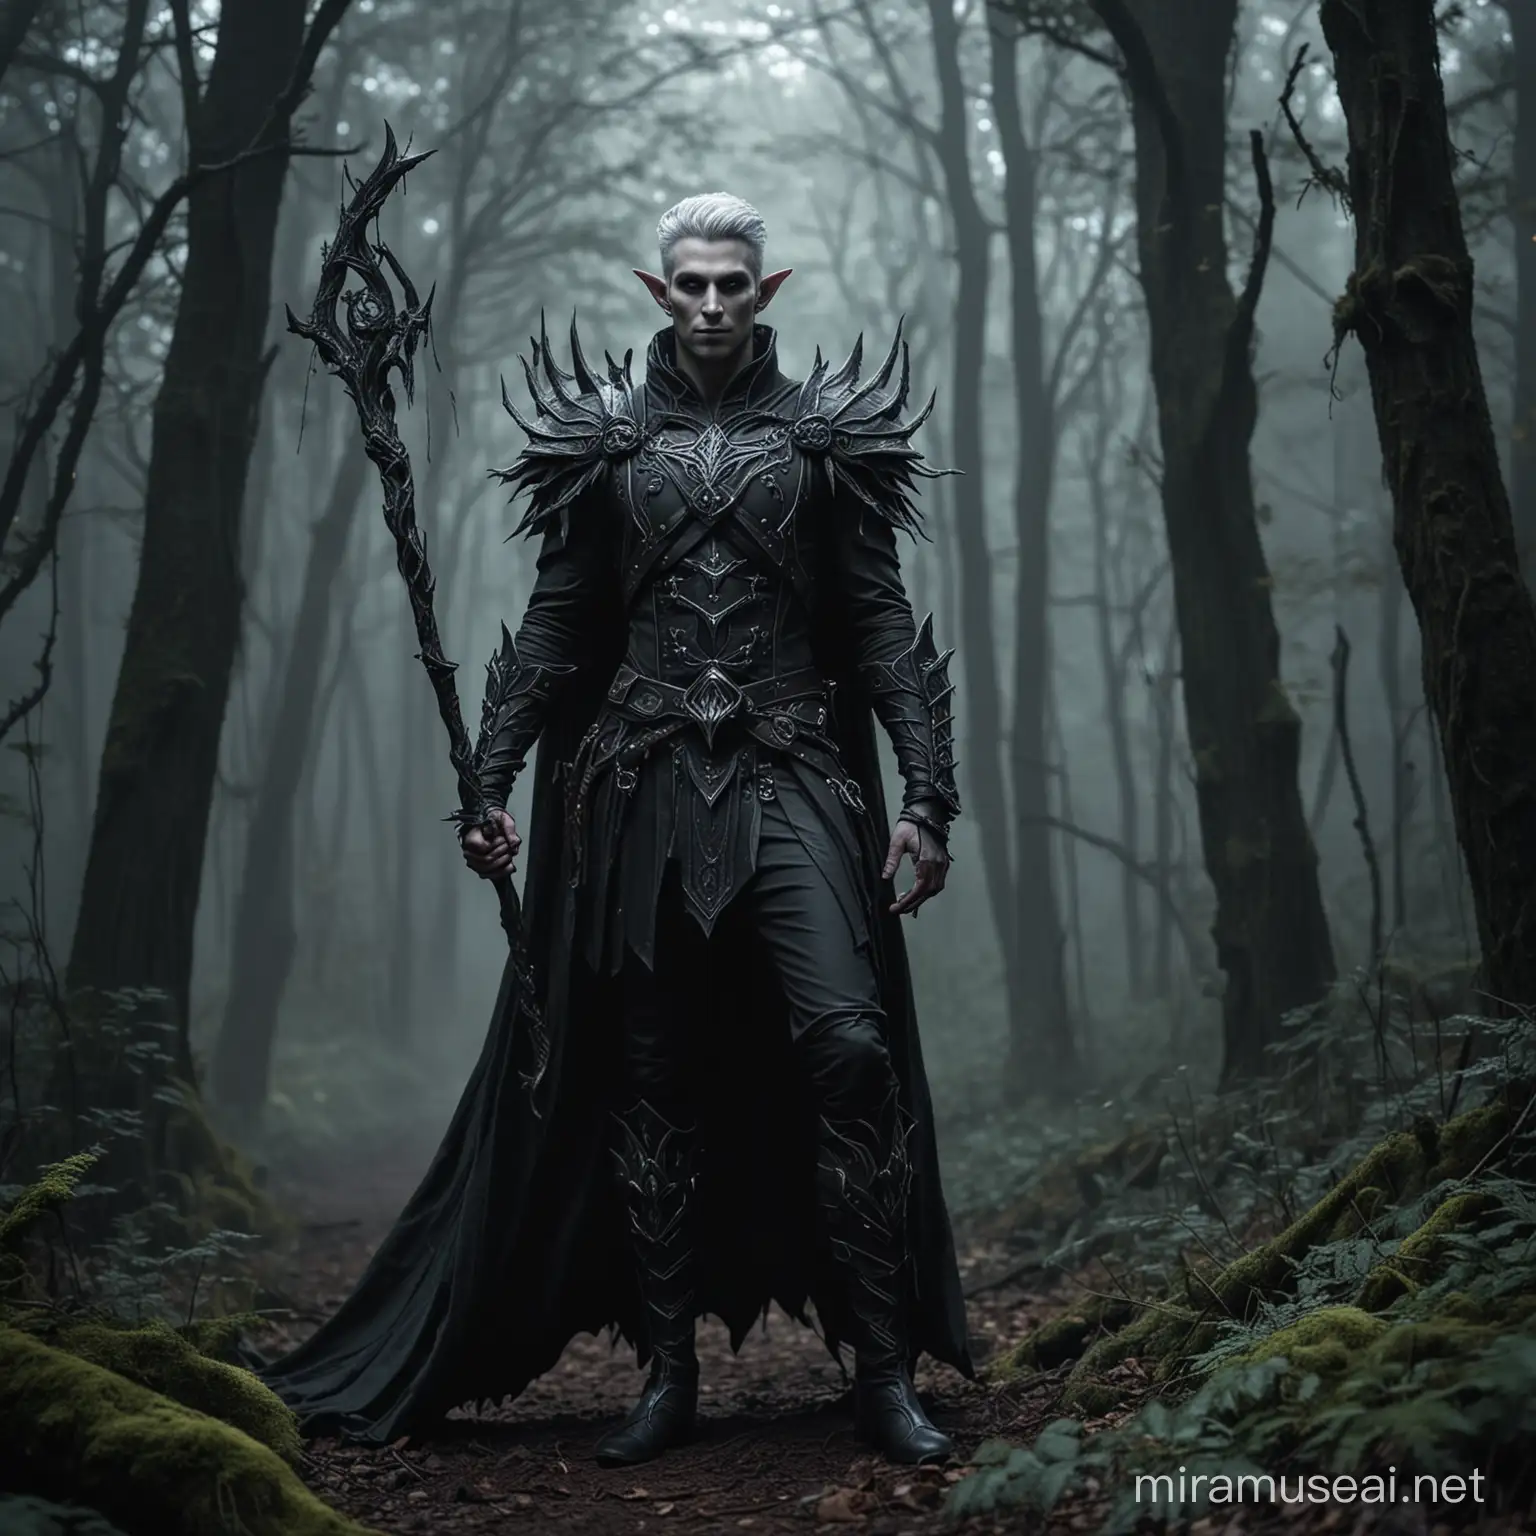 Ethereal handsome Male Elf Banshee, With Unholy Necromancer Staff and Outfit, Standing in a Dark Forest